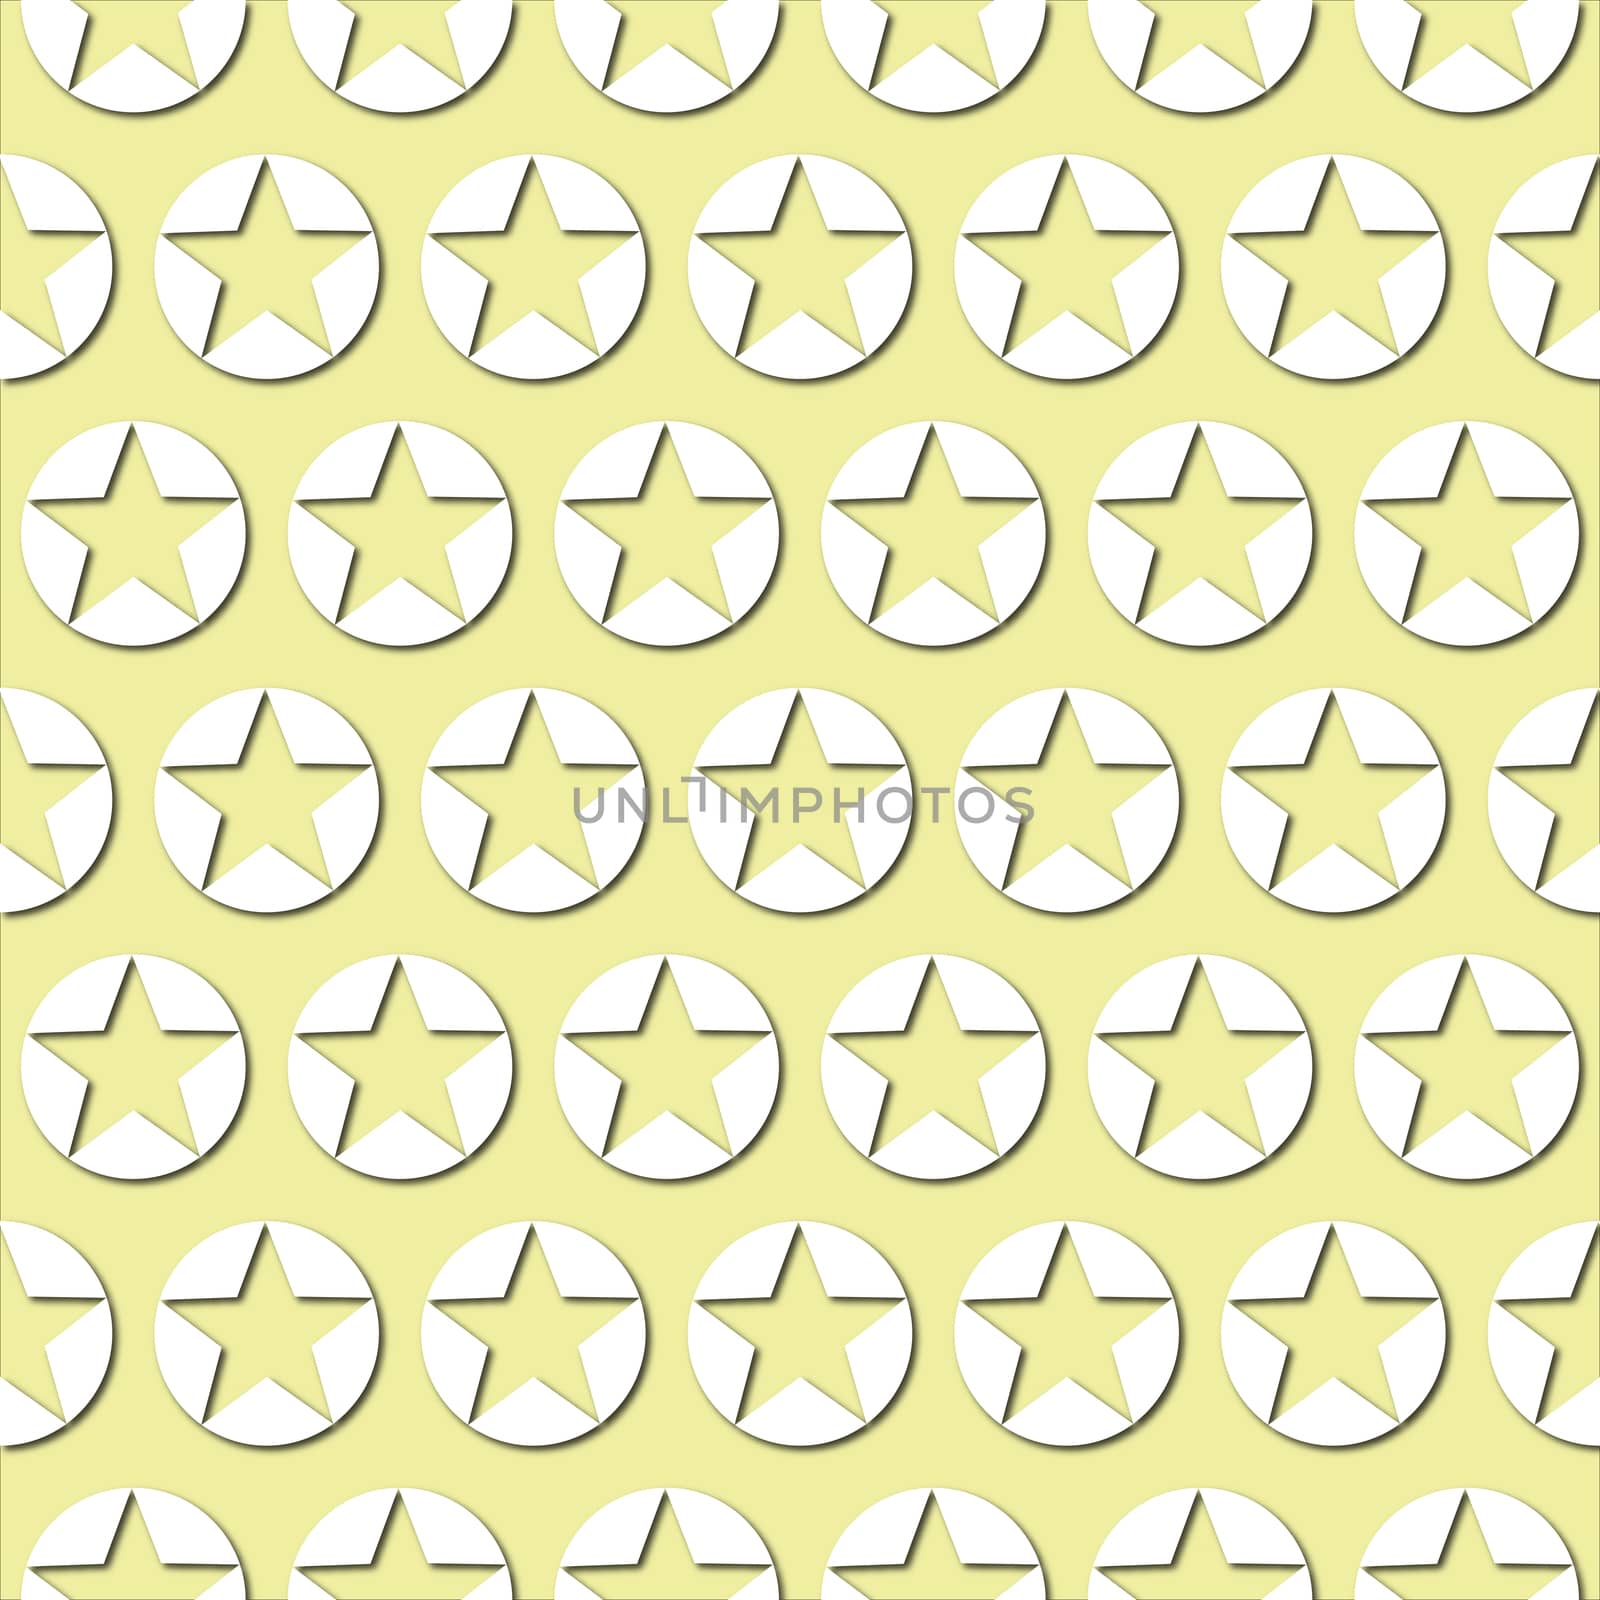 White stars icon on pale green background, seamless pattern. Paper cut style with drop shadows and highlights.